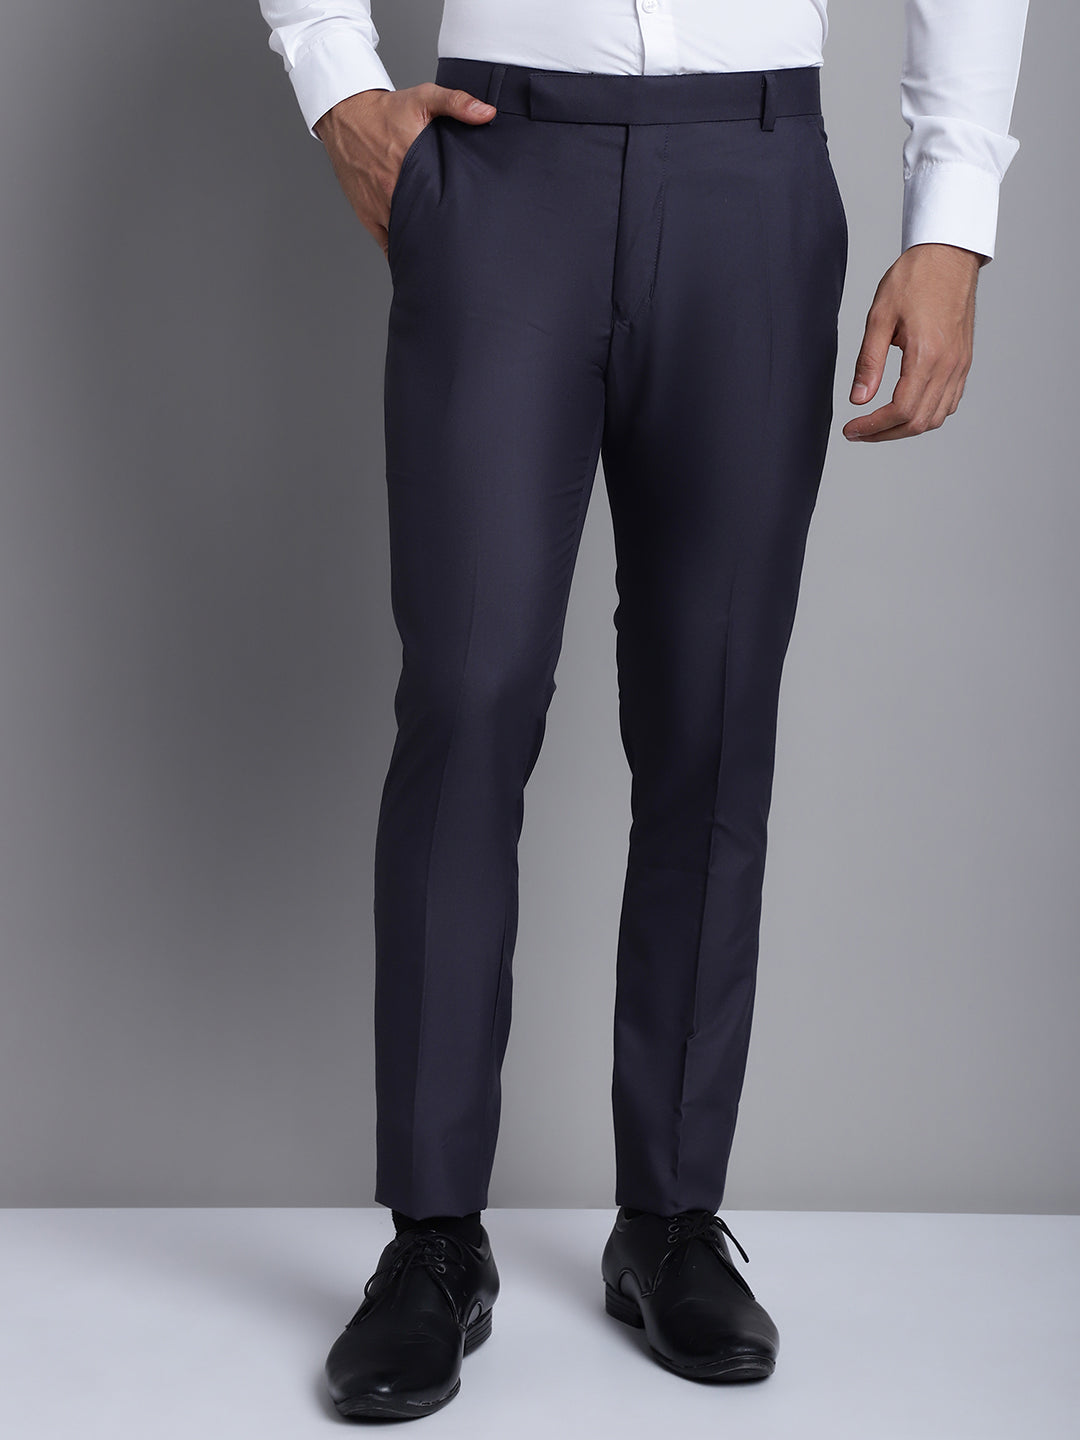 Jainish Men's Grey Tapered Fit Formal Trousers